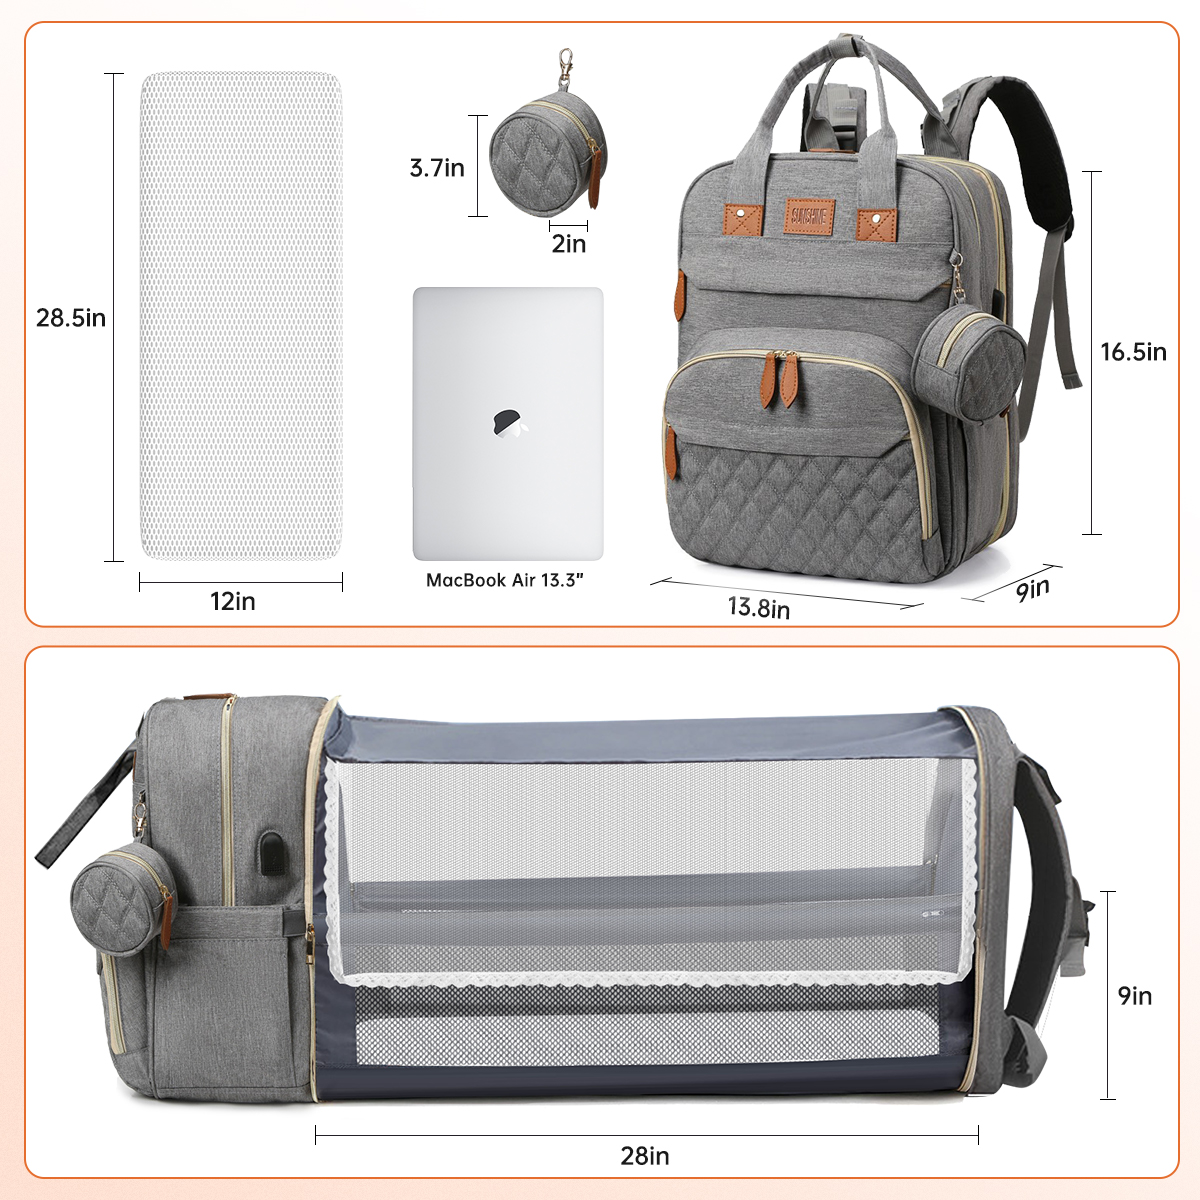 Diaper Bag Backpack, Multifunction Baby Diaper Bag with Changing Station, Large Capacity Waterproof Travel Backpack w/ Pacifier Case & USB Charging, Baby Stuff Organizer, Unisex Shower Gifts(Grey) - image 2 of 7